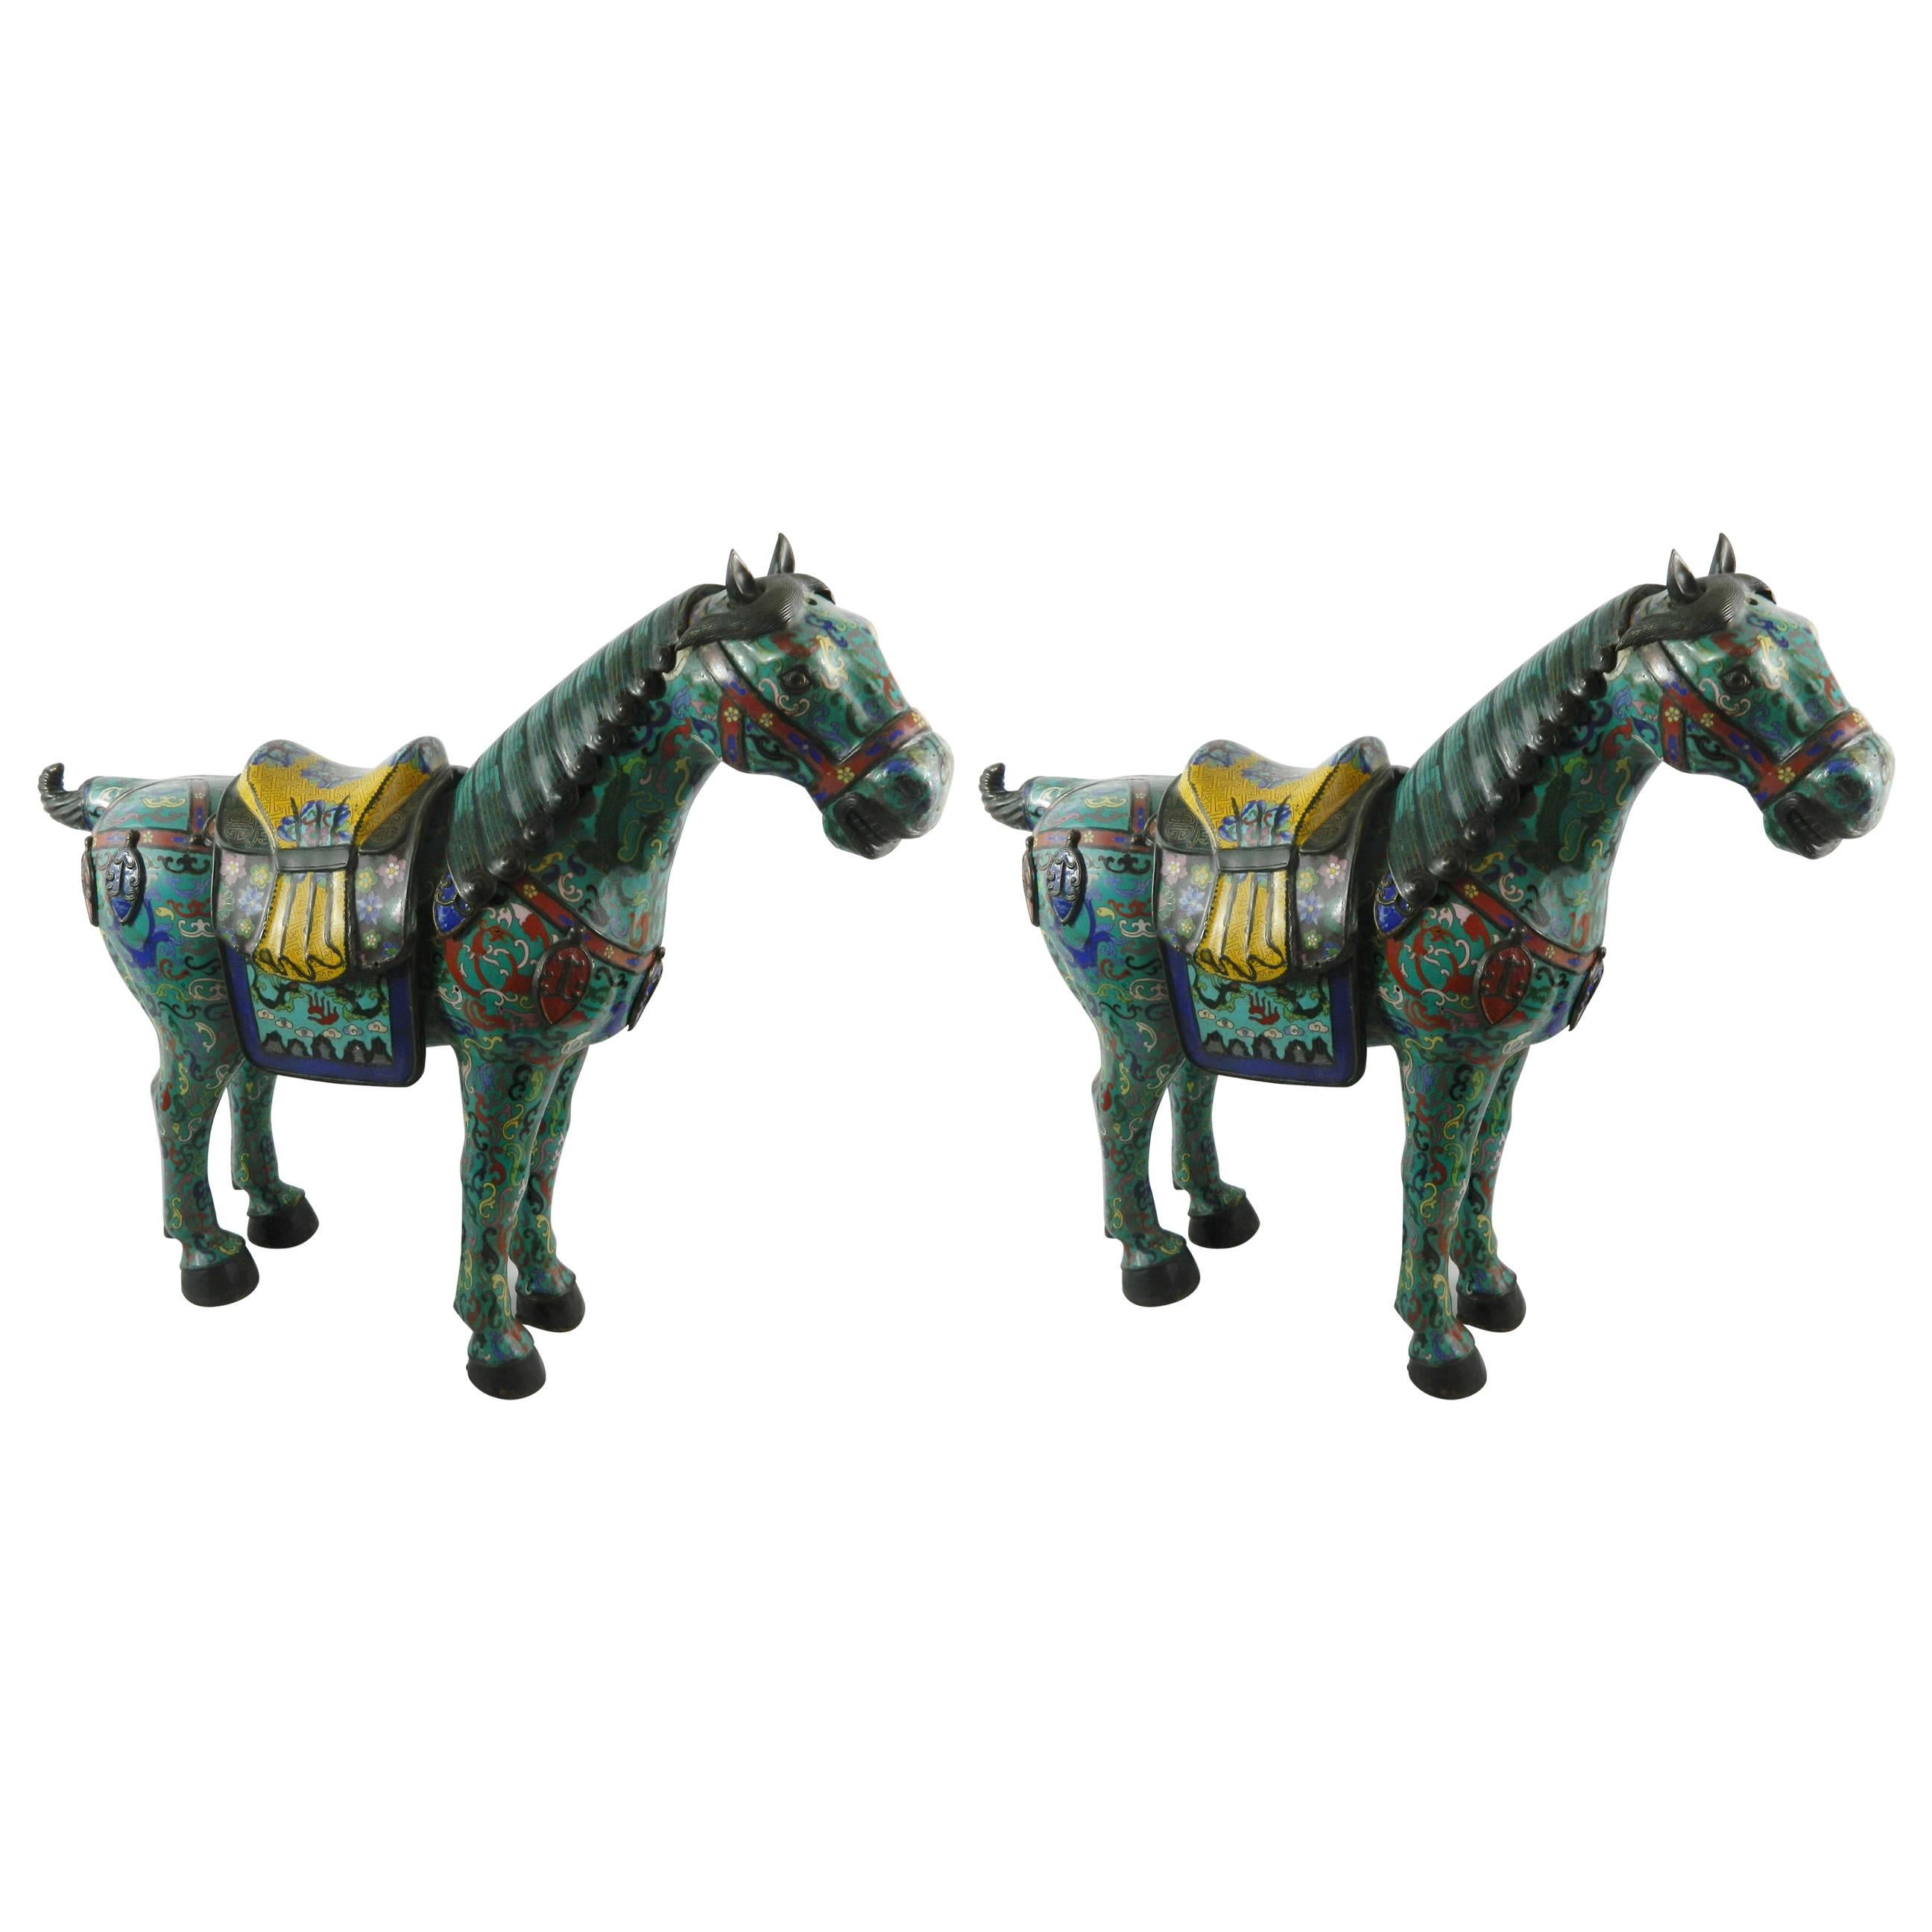 Pair of Chinese Cloisonne Horse Sculptures with Saddles, 20th Century